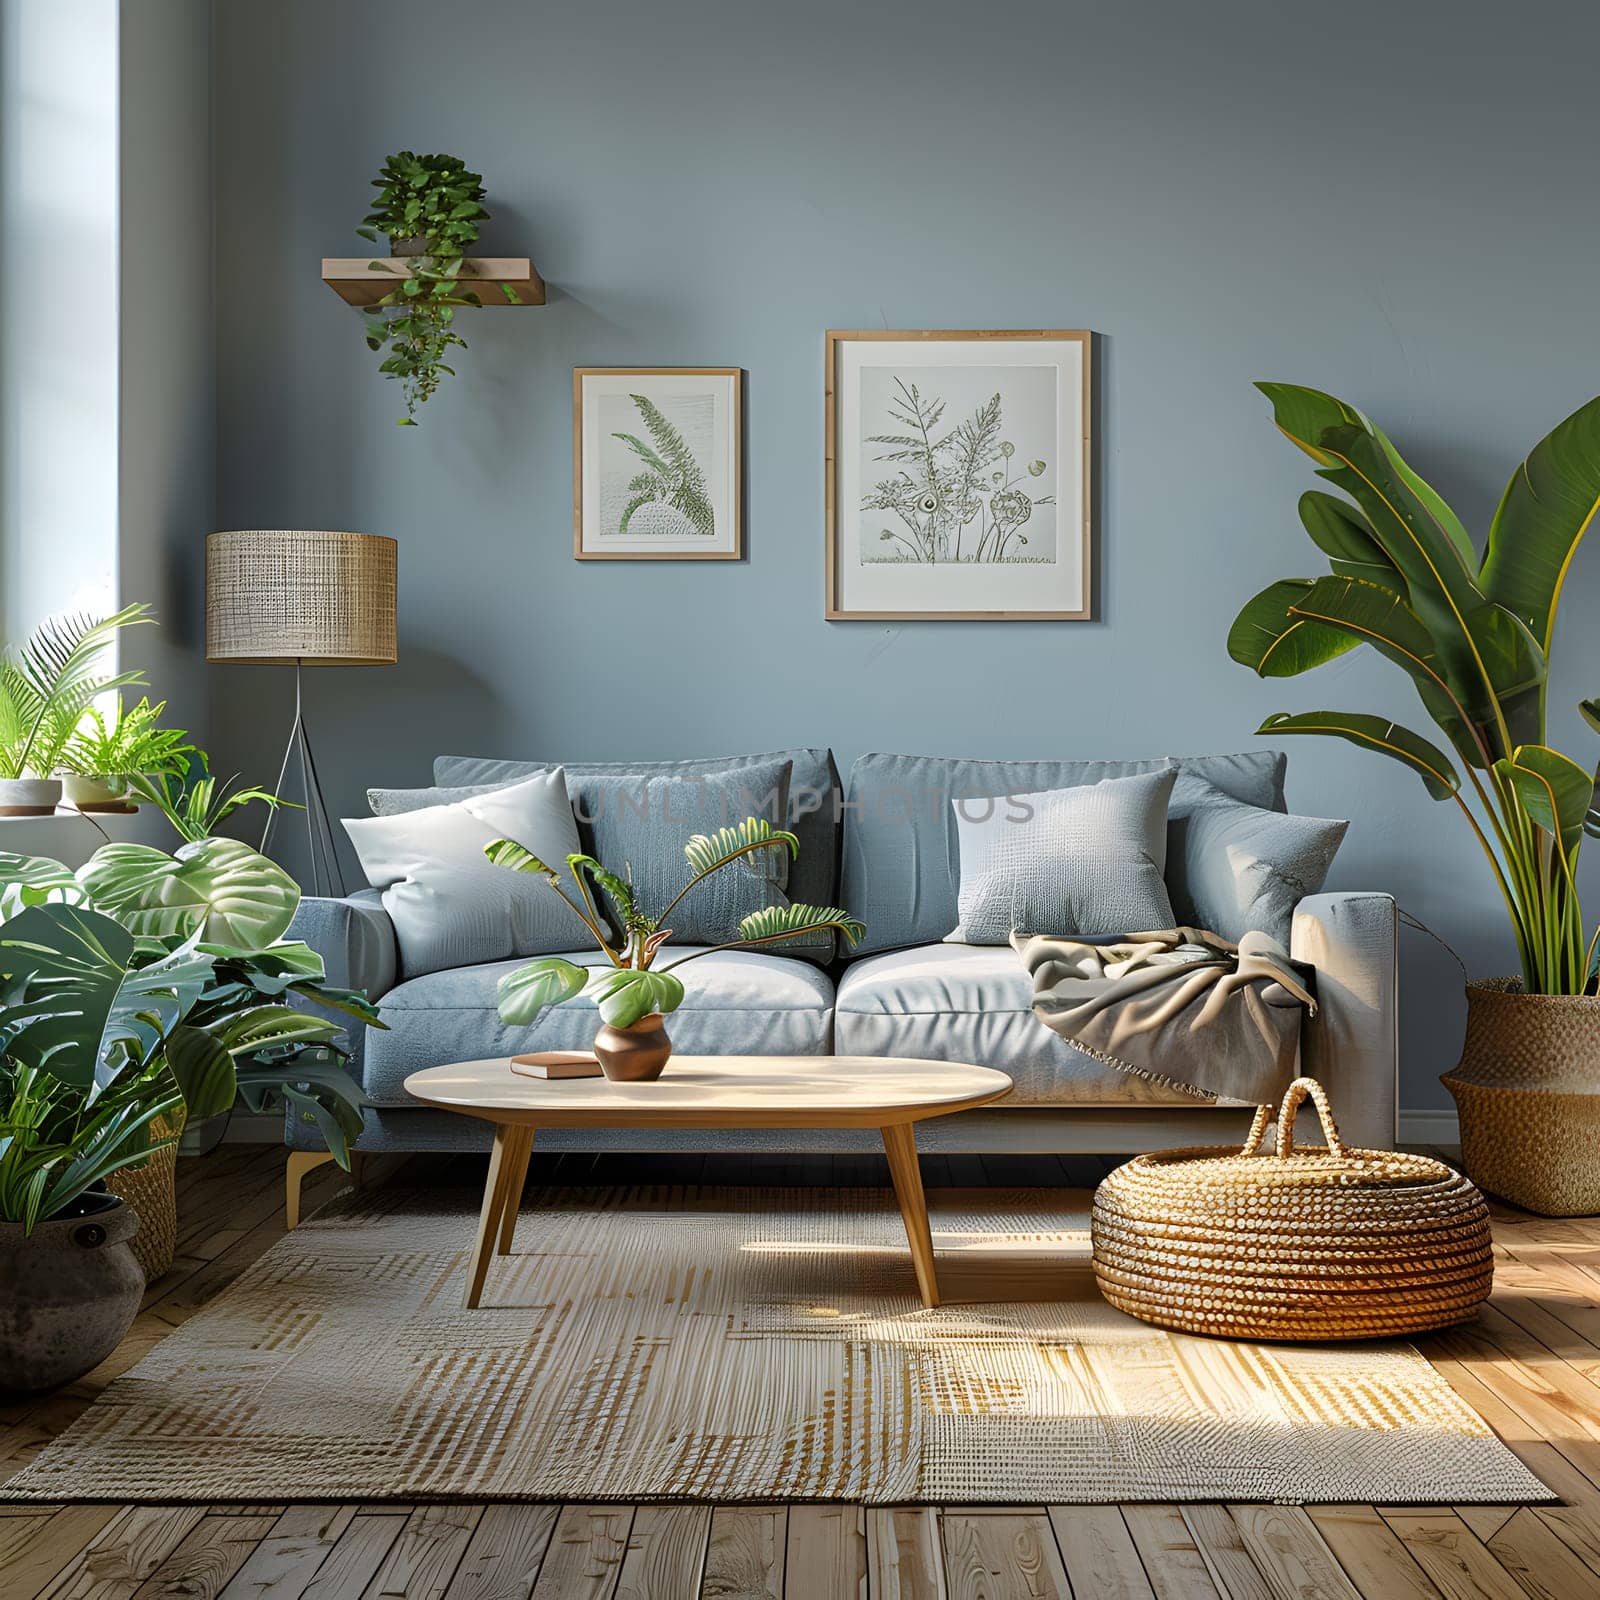 Living room with couch, coffee table, and plants for interior design and comfort by Nadtochiy